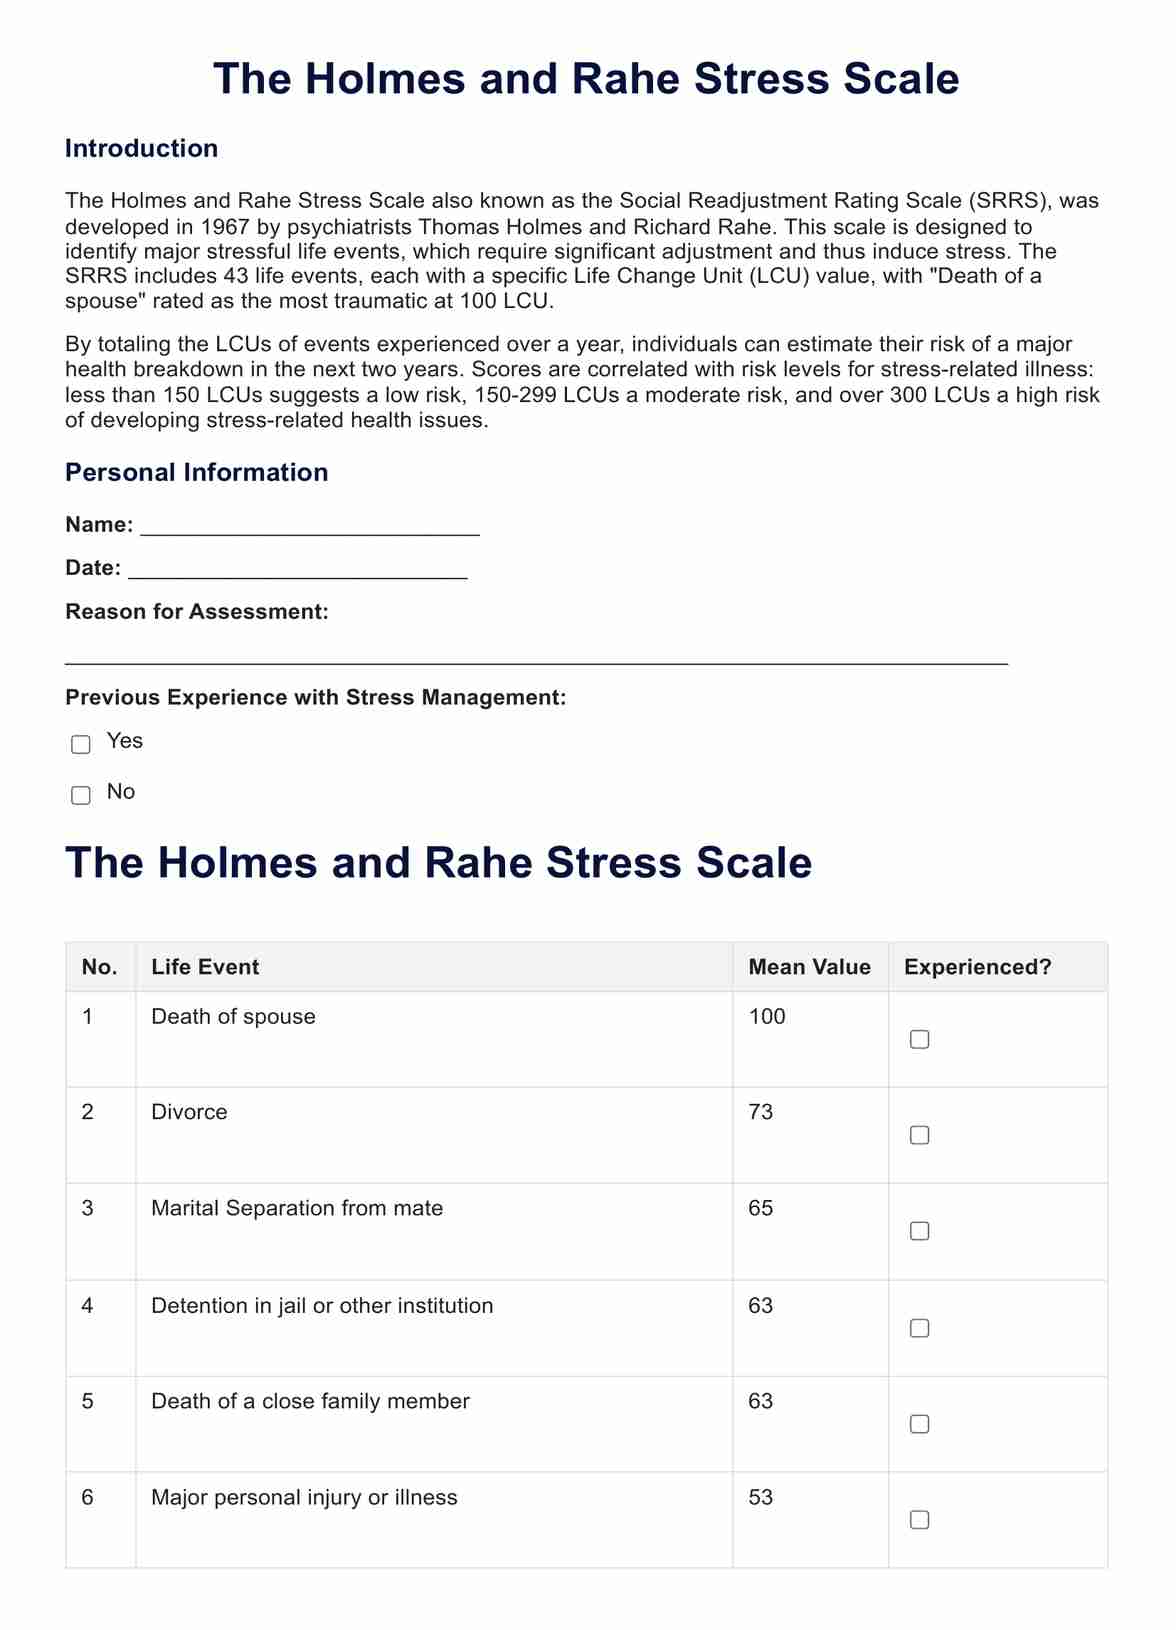 The Holmes and Rahe Stress Scale PDF Example